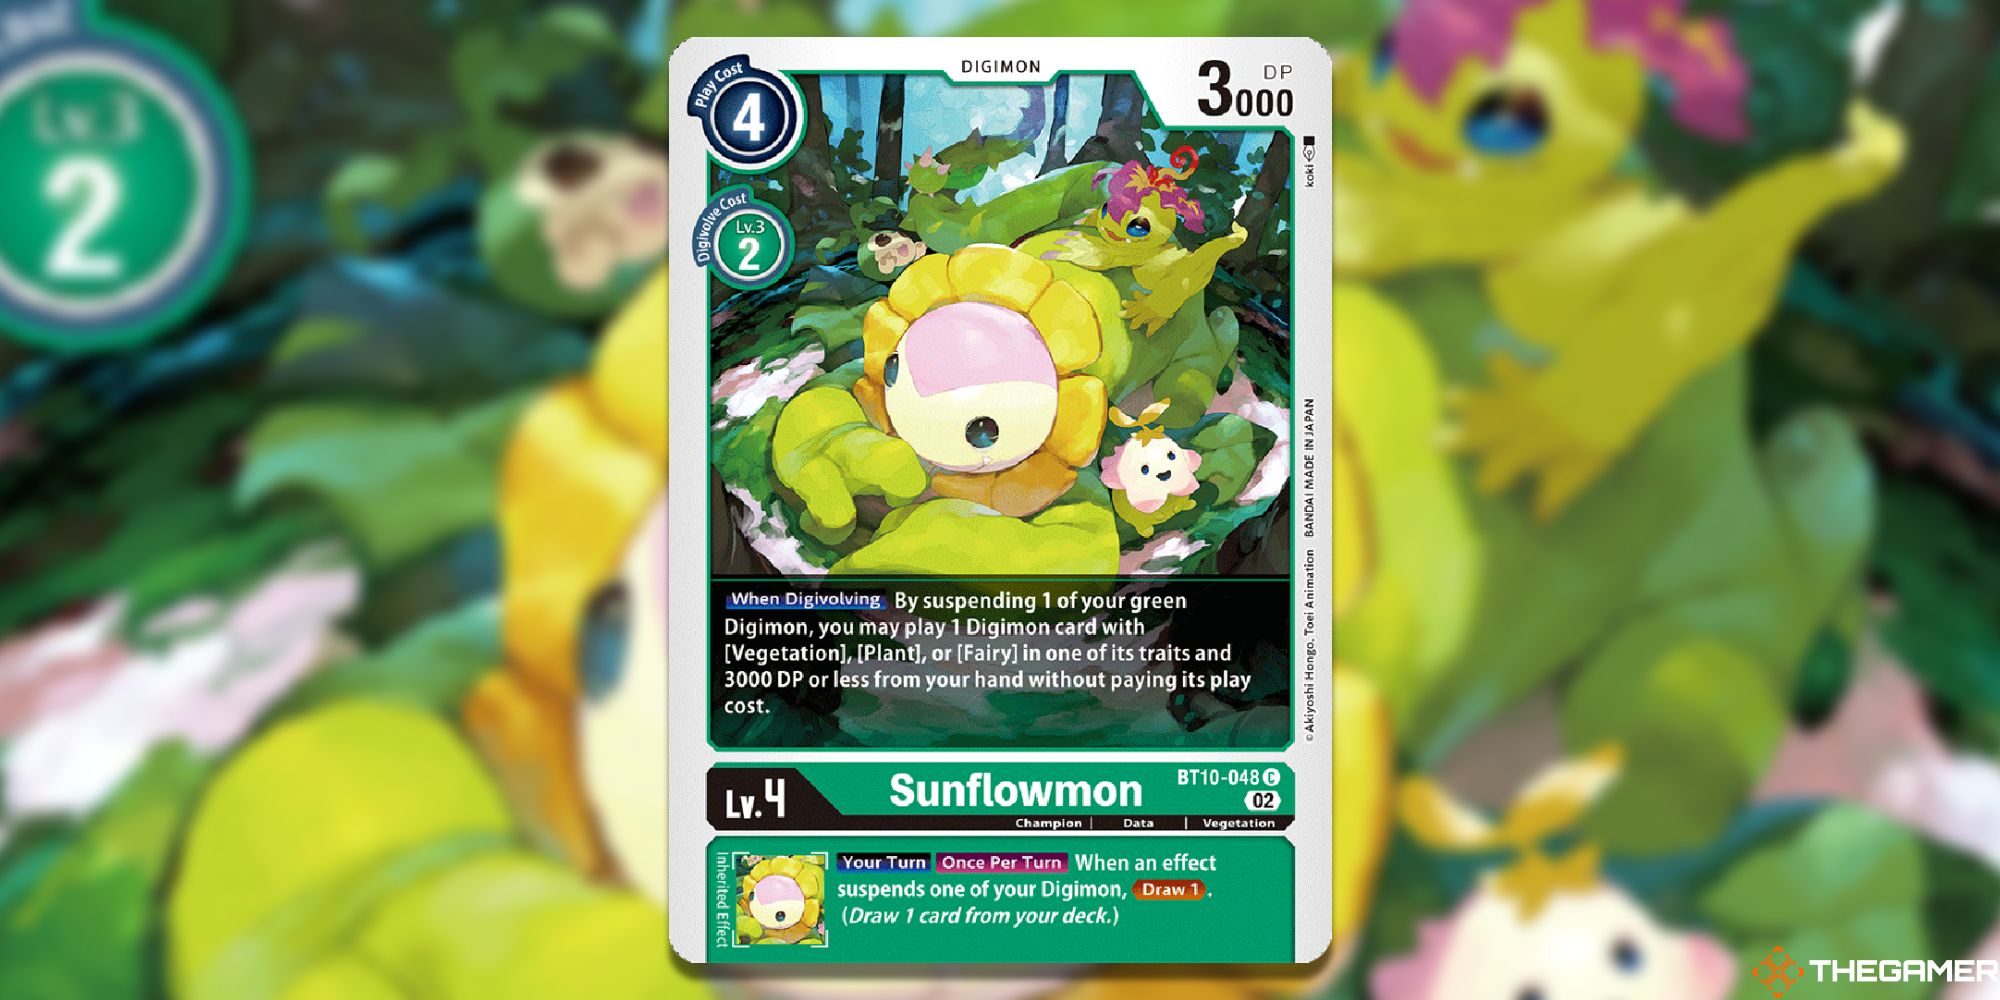 sunflowmon image with blurred background digimon card game